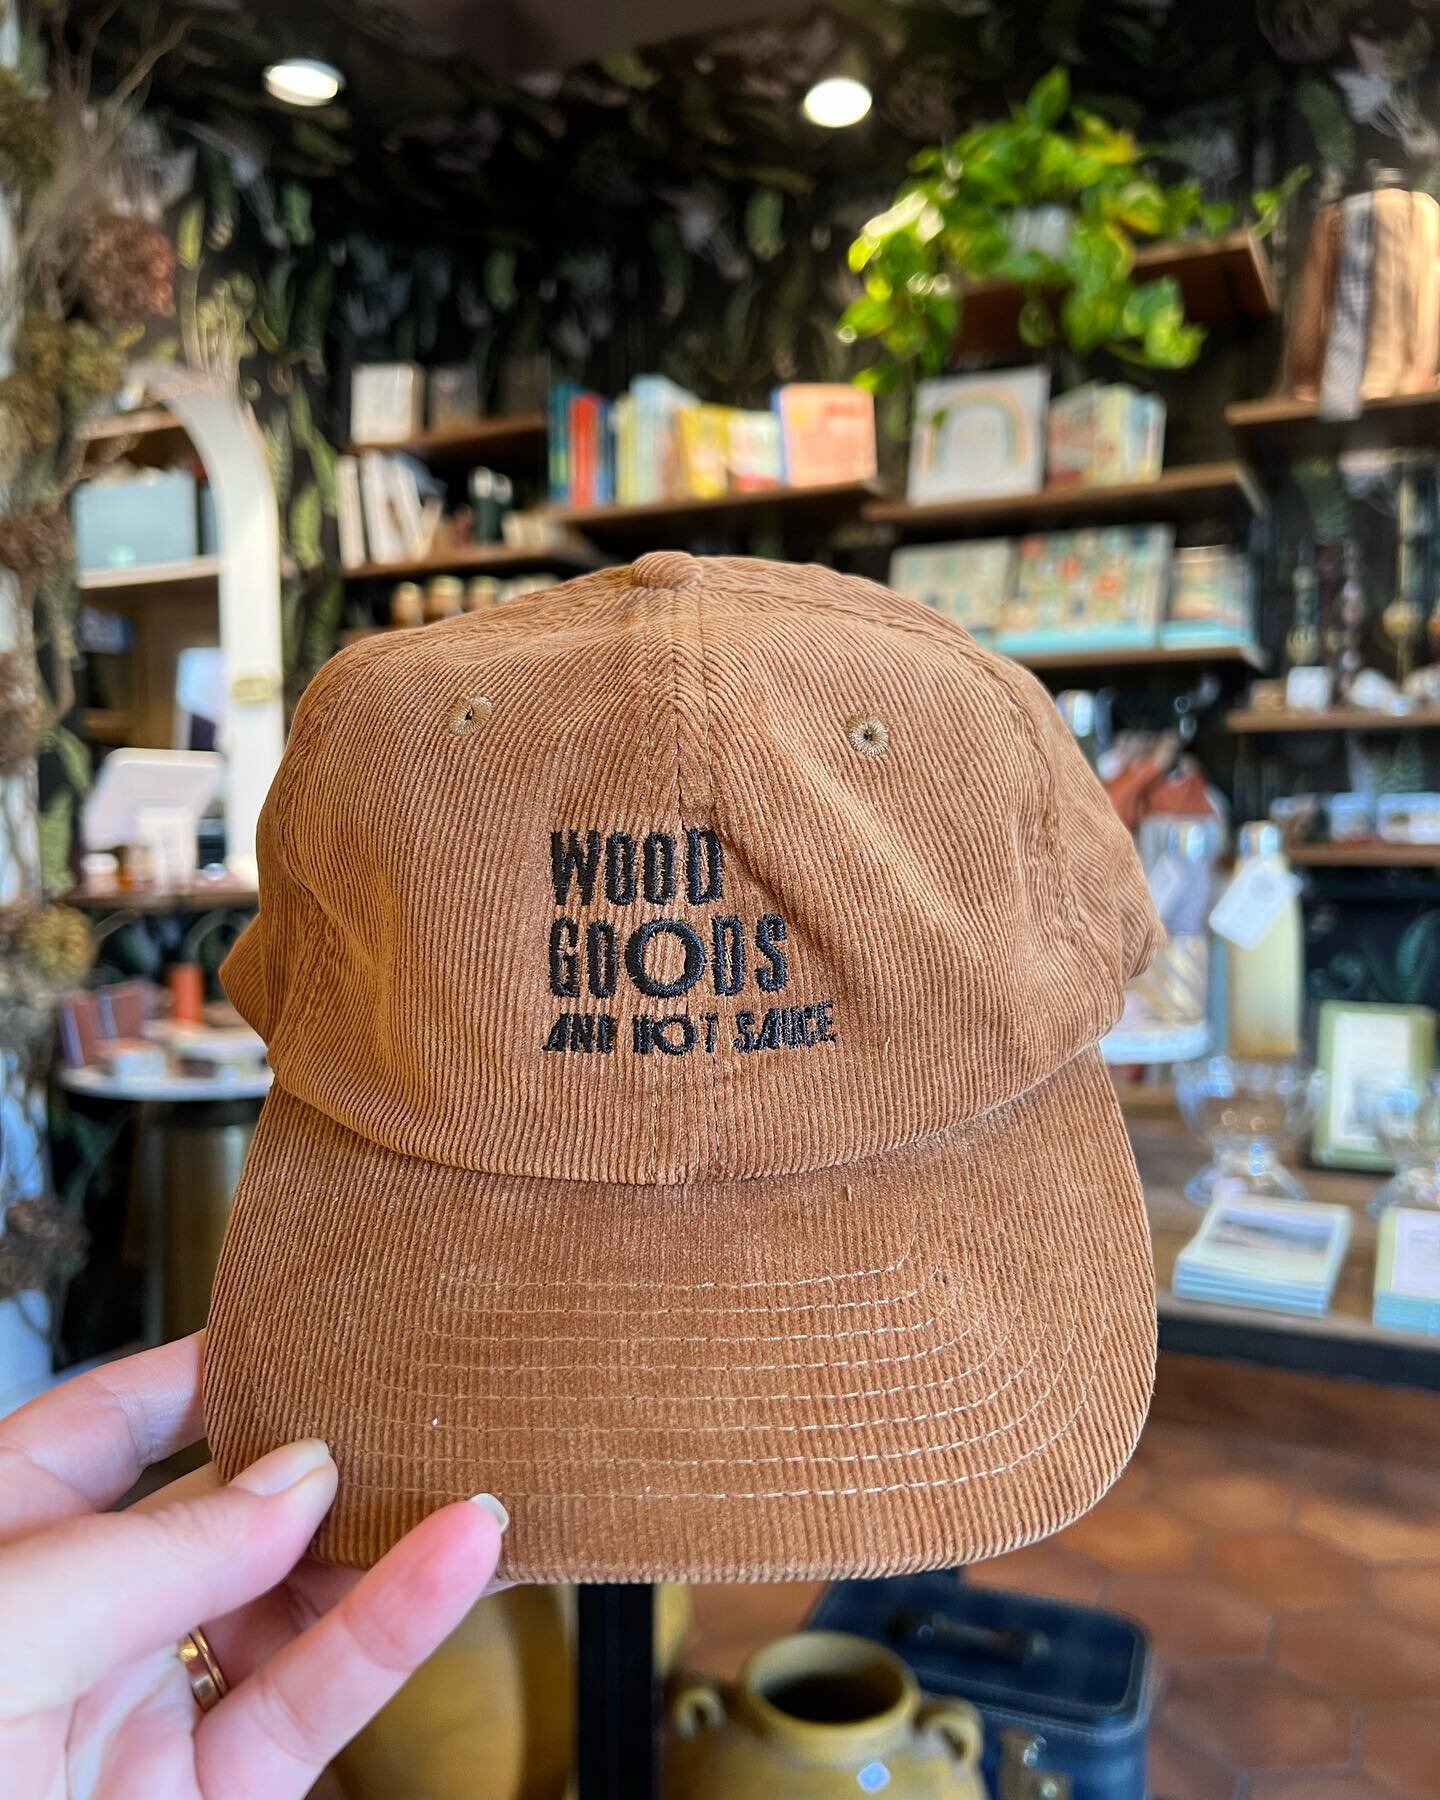 Fresh swag arrived in time for our pop-up sidewalk party this Saturday March 11, 12-6pm! 
The first of our Second Saturday&rsquo;s Balboa Block party of the year. 

@uncleandyswinecloset is prepared to sling delicious pizzas rain or shine, and we&rsq